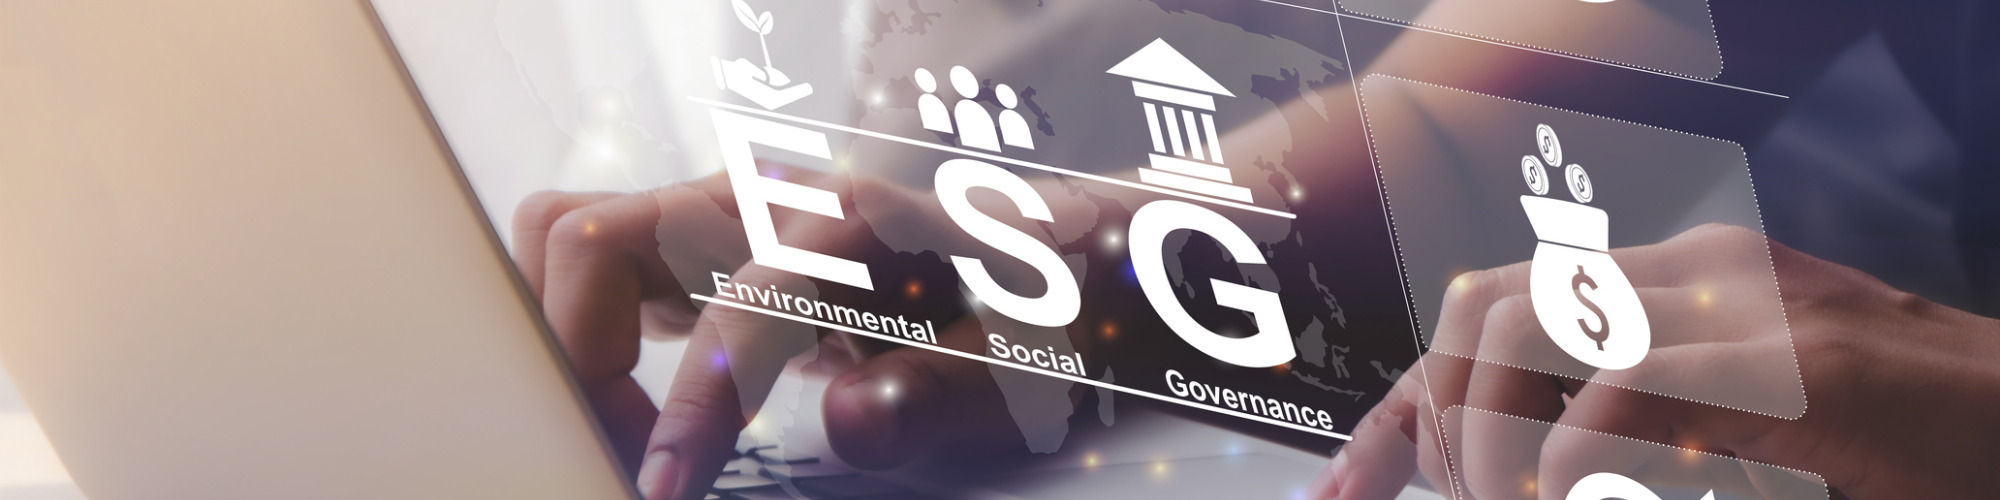 ESG - An Introduction to Non-Financial Sustainable Reporting